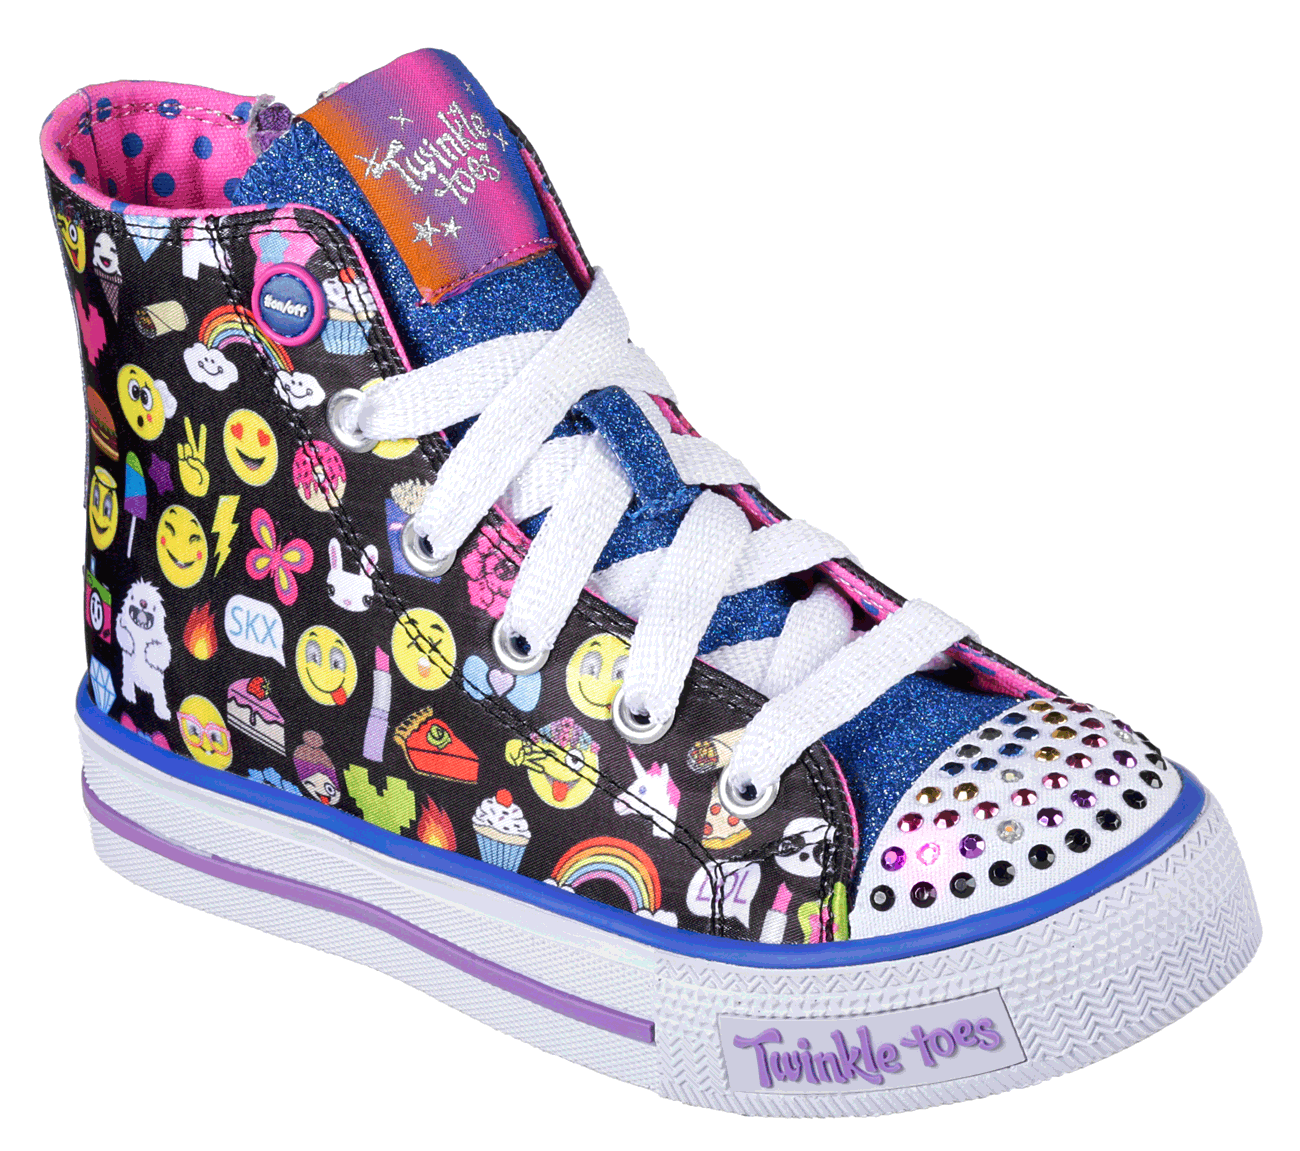 Buy SKECHERS Twinkle Toes: Shuffles - Chat Time Twinkle Toes Shoes